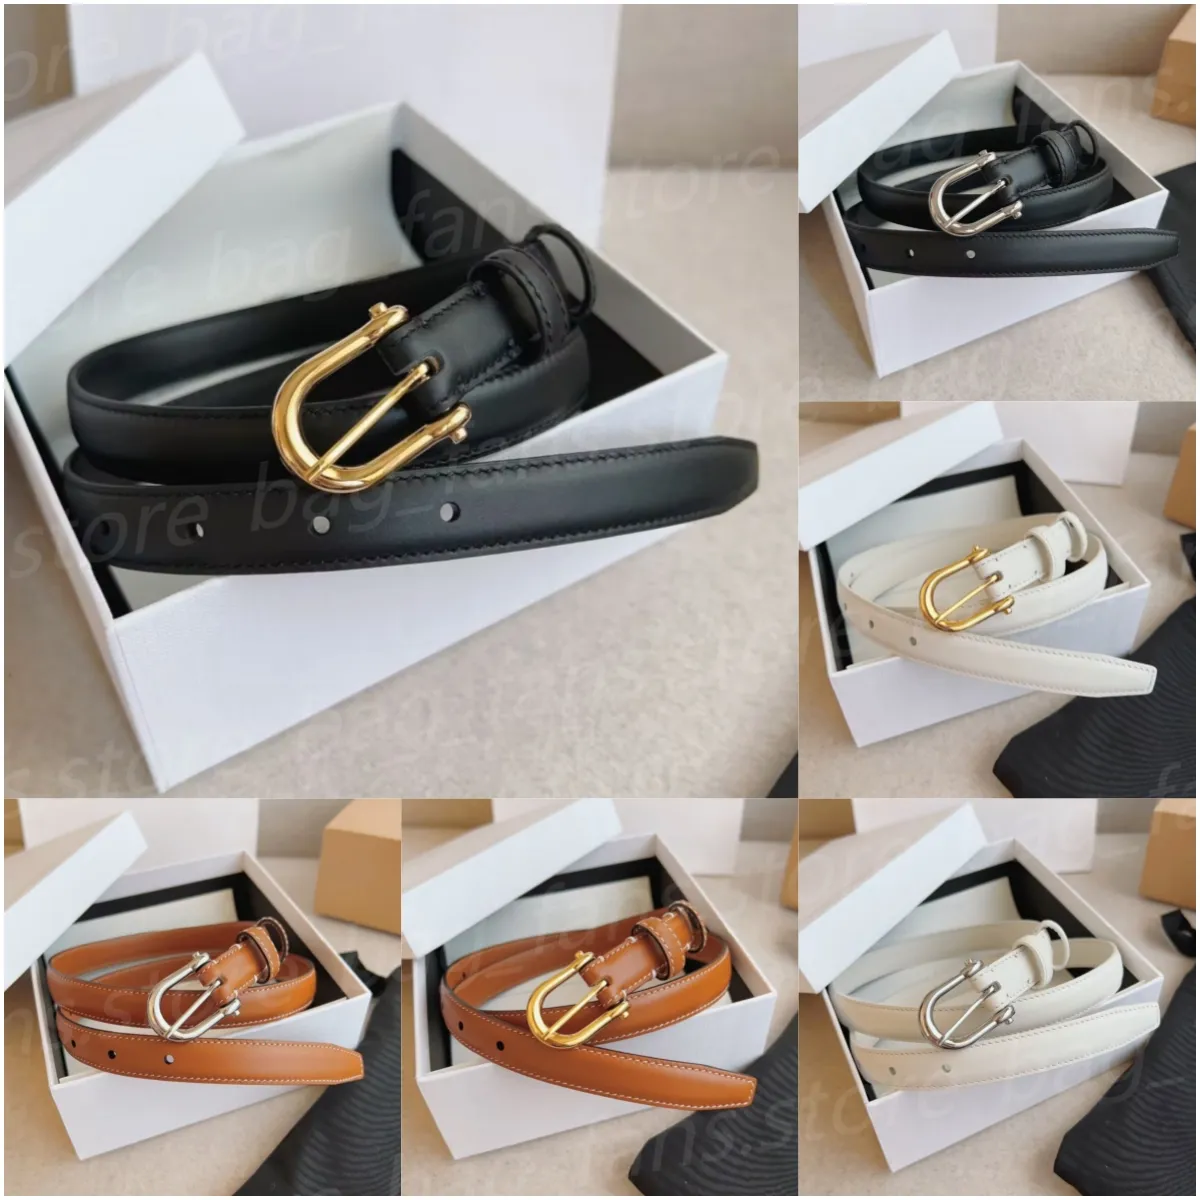 10A Designer Classic Belts Fashion Women's Luxury Belt with Gold Logo Width 18mm 25mm with Box Festival Gifts 17178 25818 26116